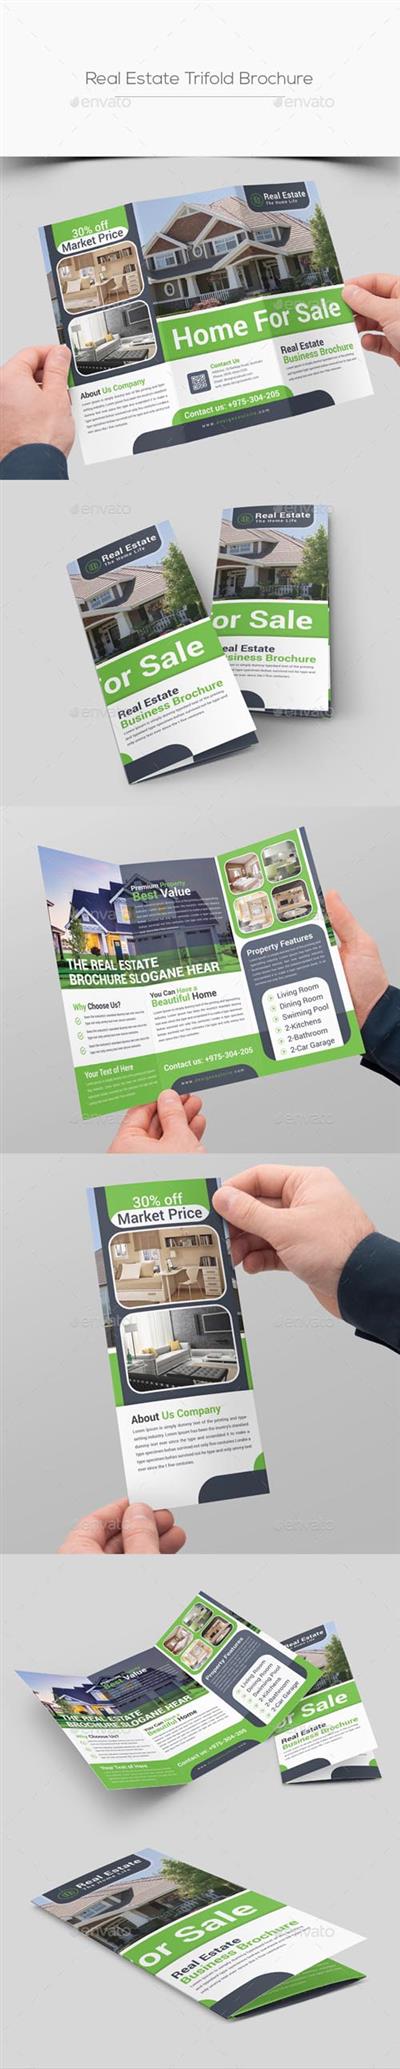 Real Estate Trifold Brochure 20175499